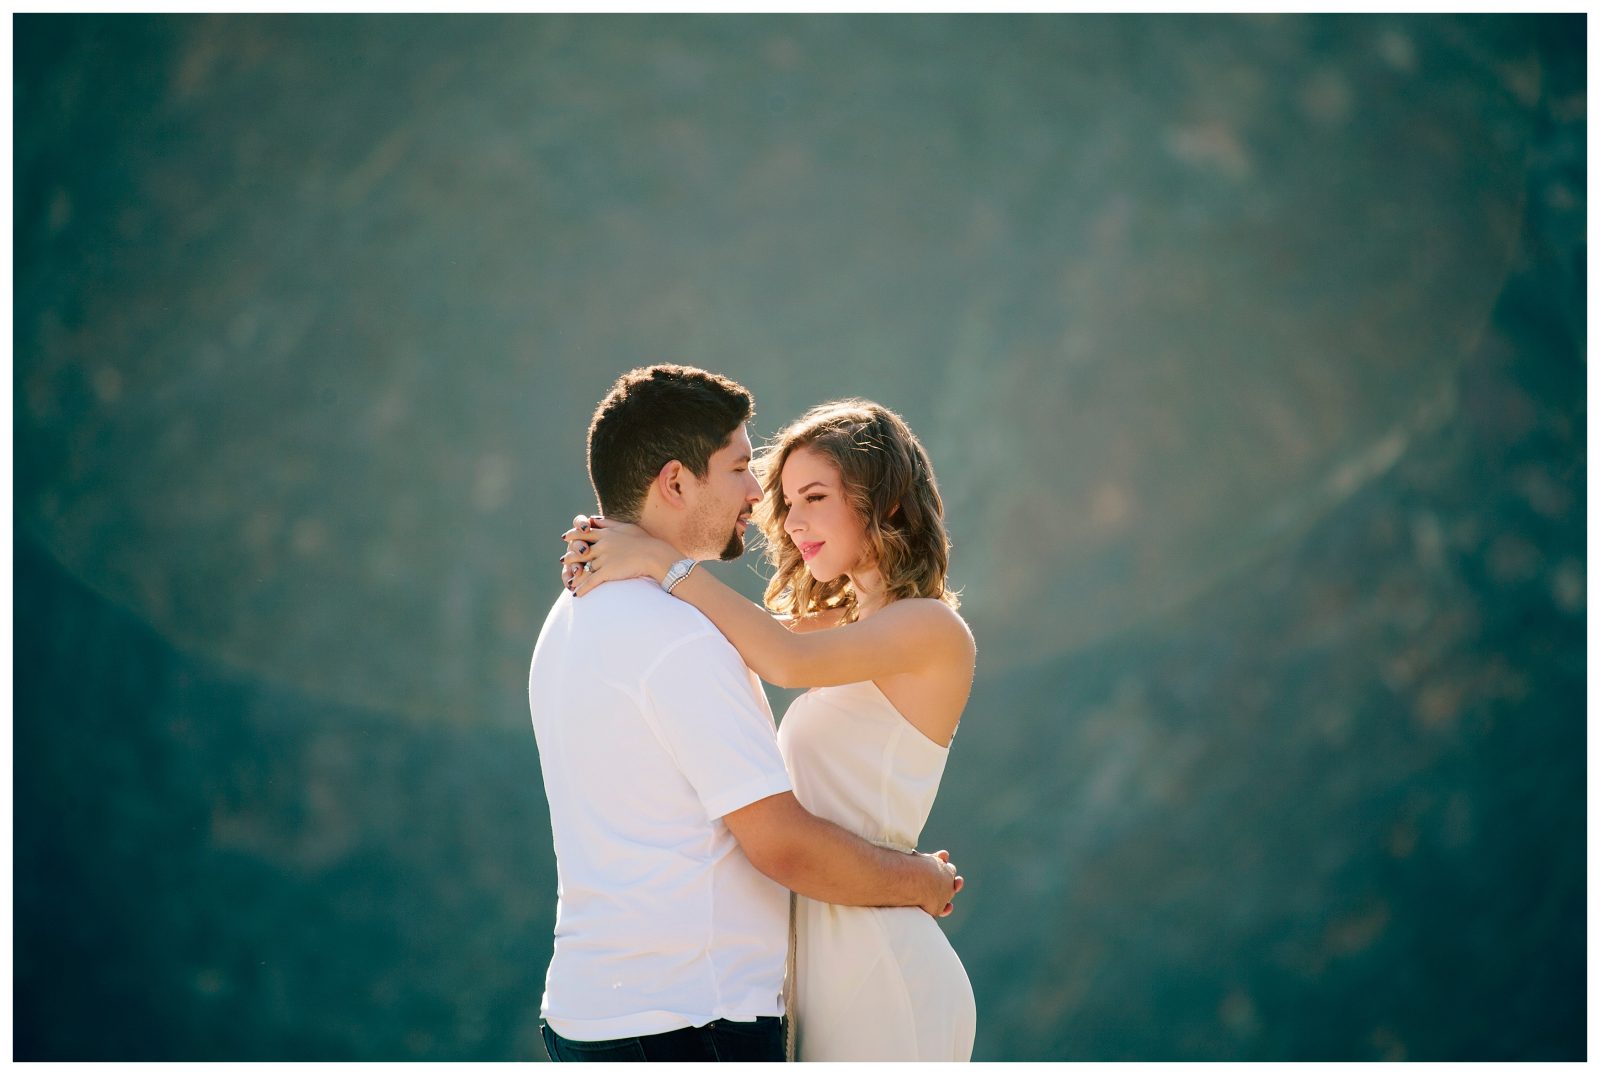 An Engagement Shoot: Hatta Mountains, featured on Bride Club ME